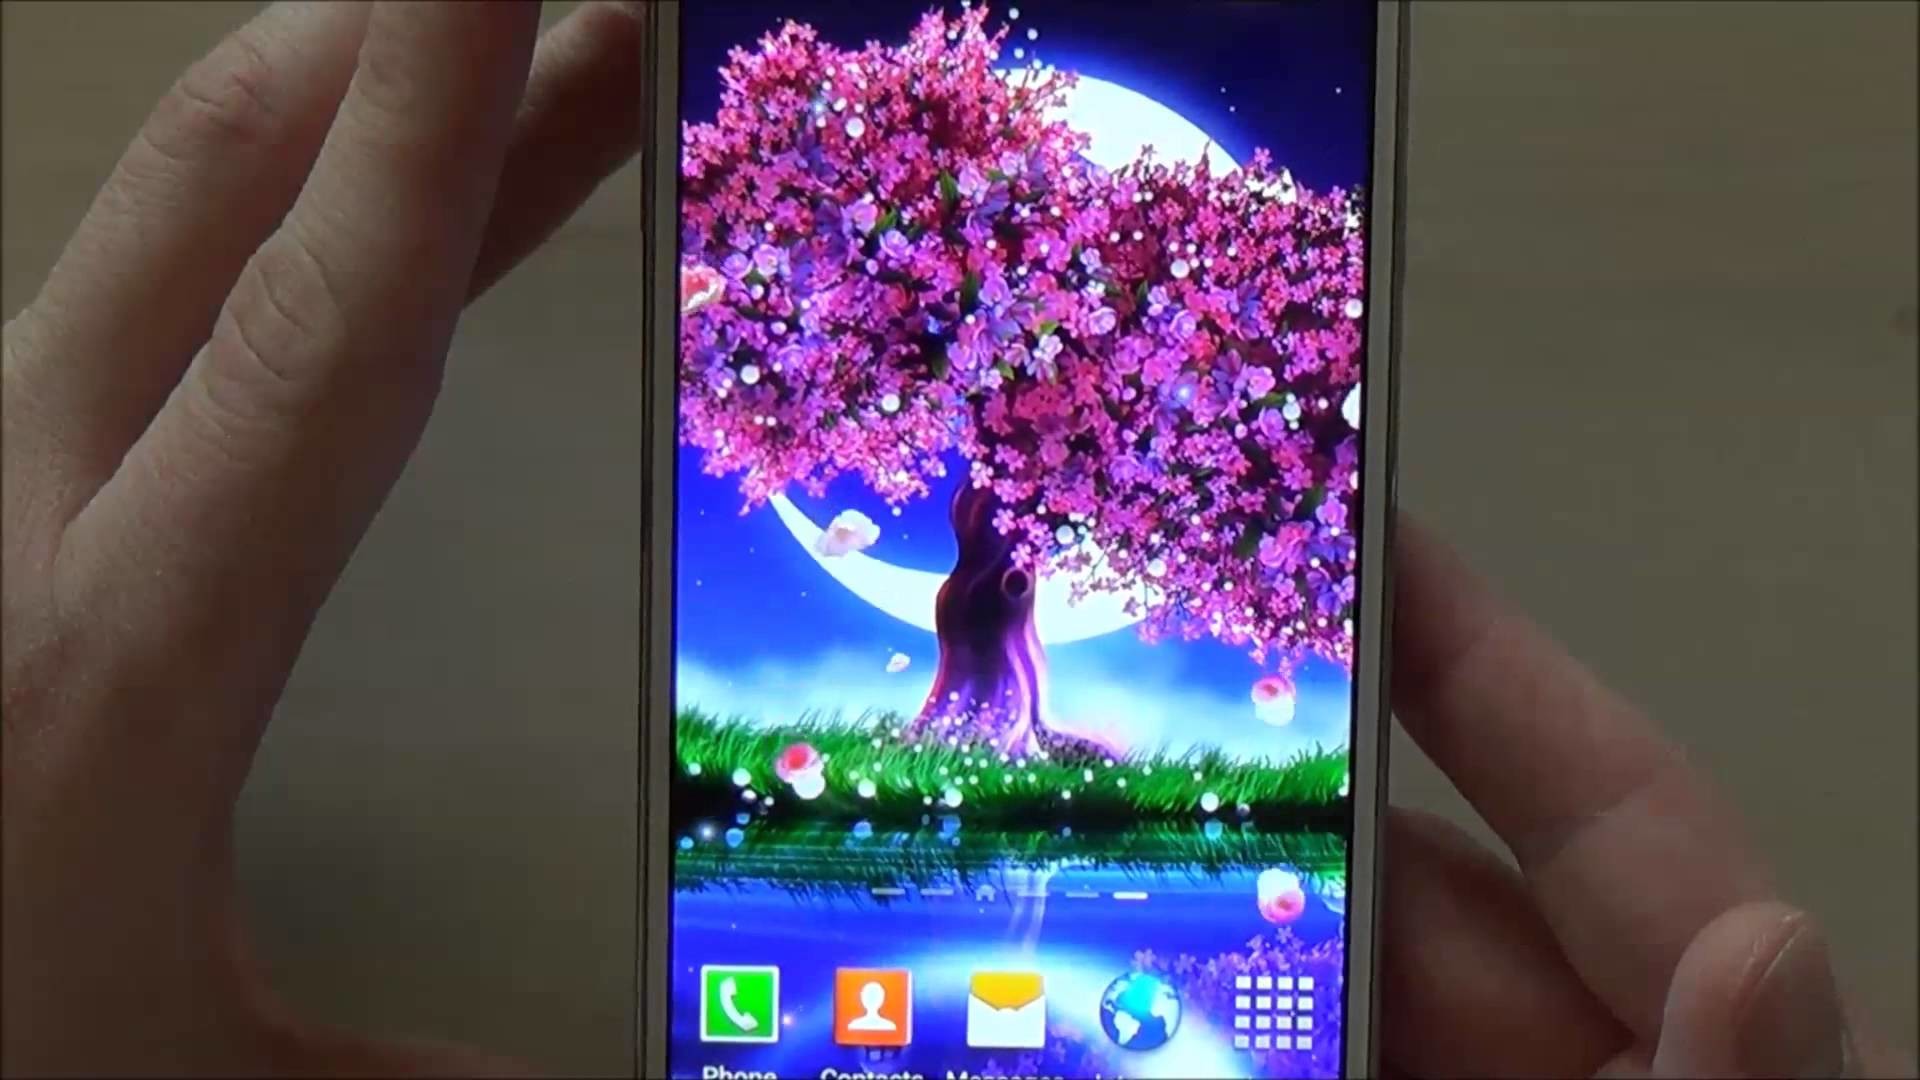 1920x1080 Free cherry blossom live wallpaper for Android phones and tablets - YouTube